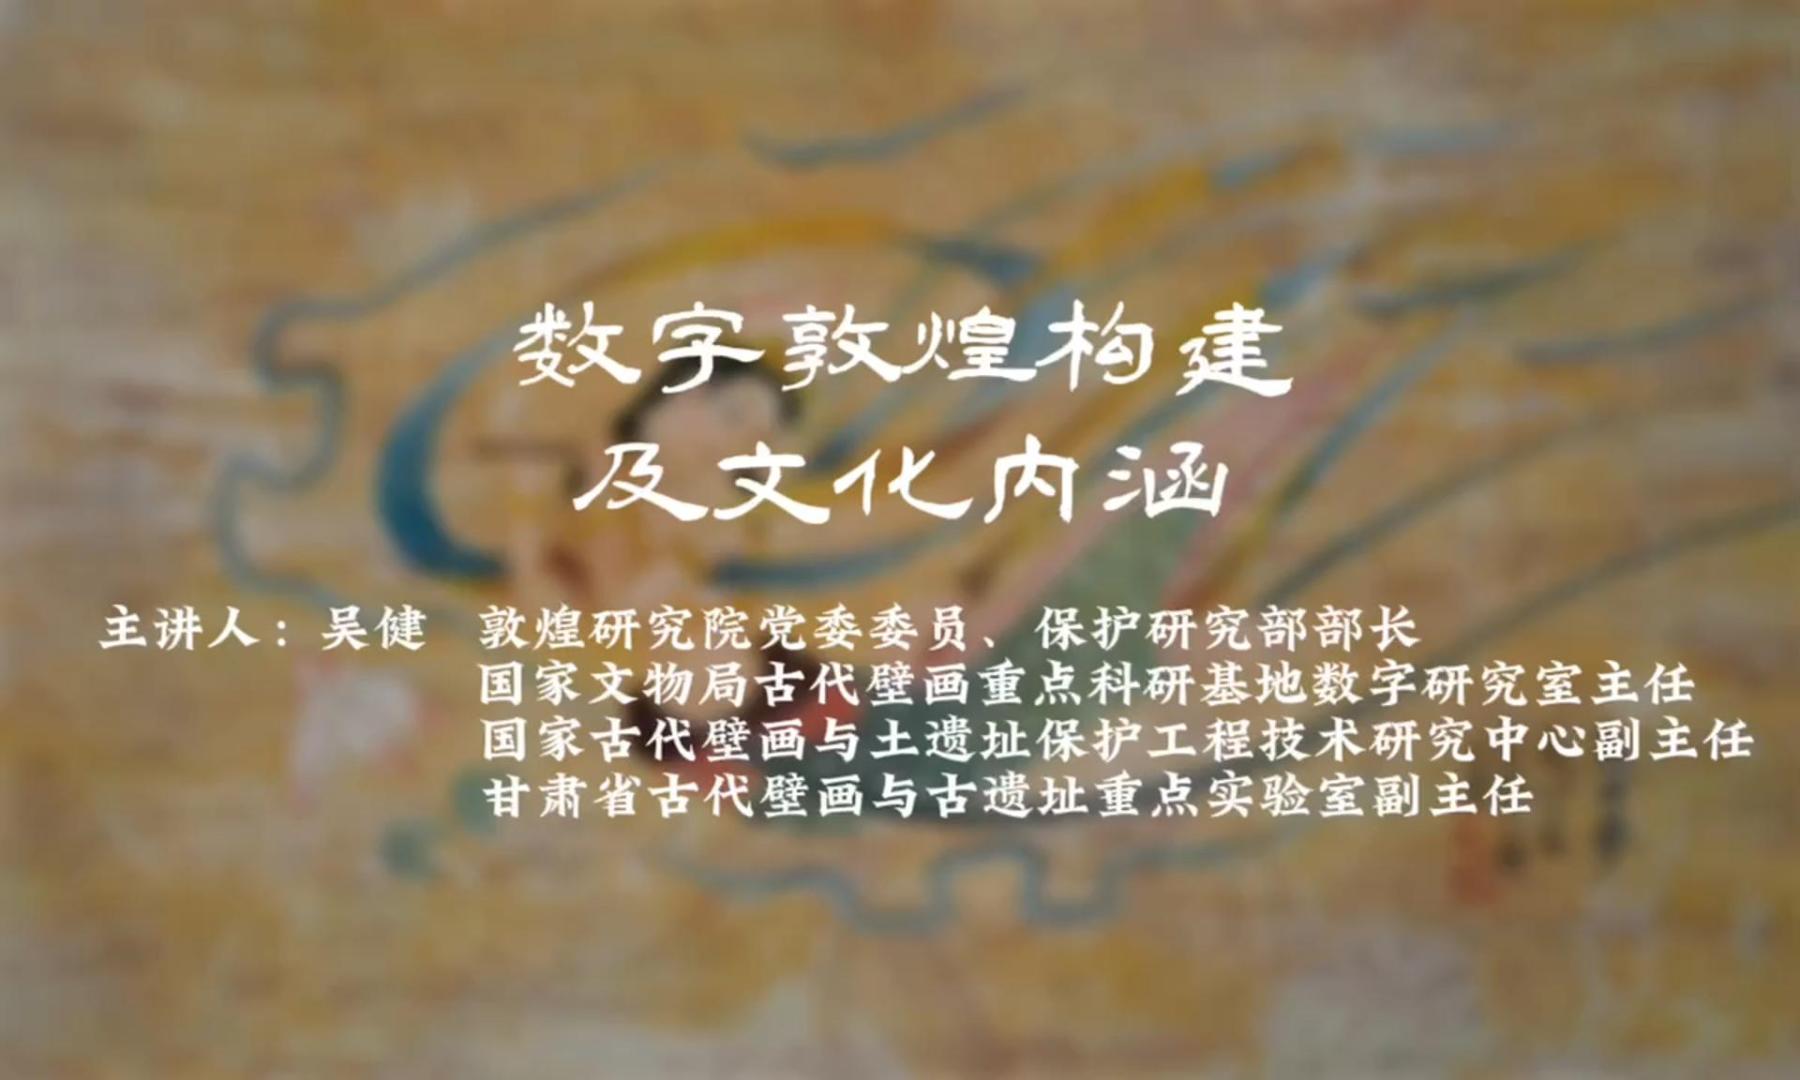 Digital Dunhuang Construction and Cultural Connotation